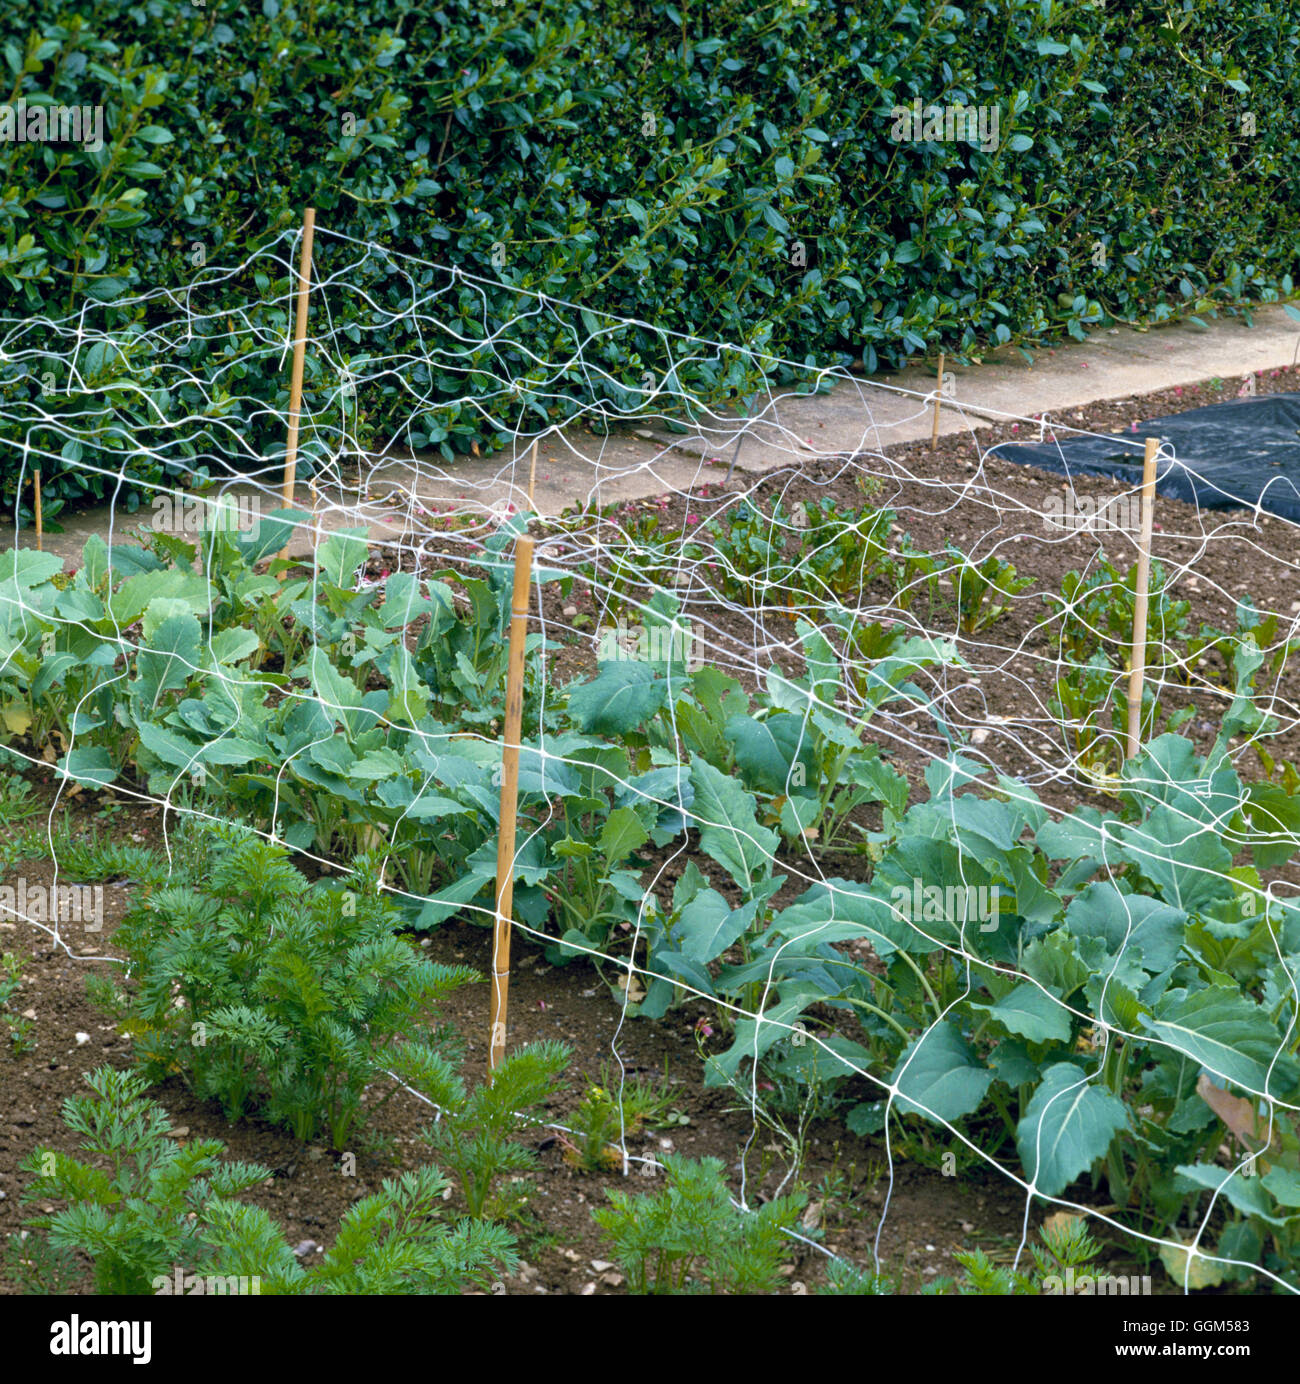 Protection Against Pests - Netting Over Brassica crop   TAS006577 Stock Photo